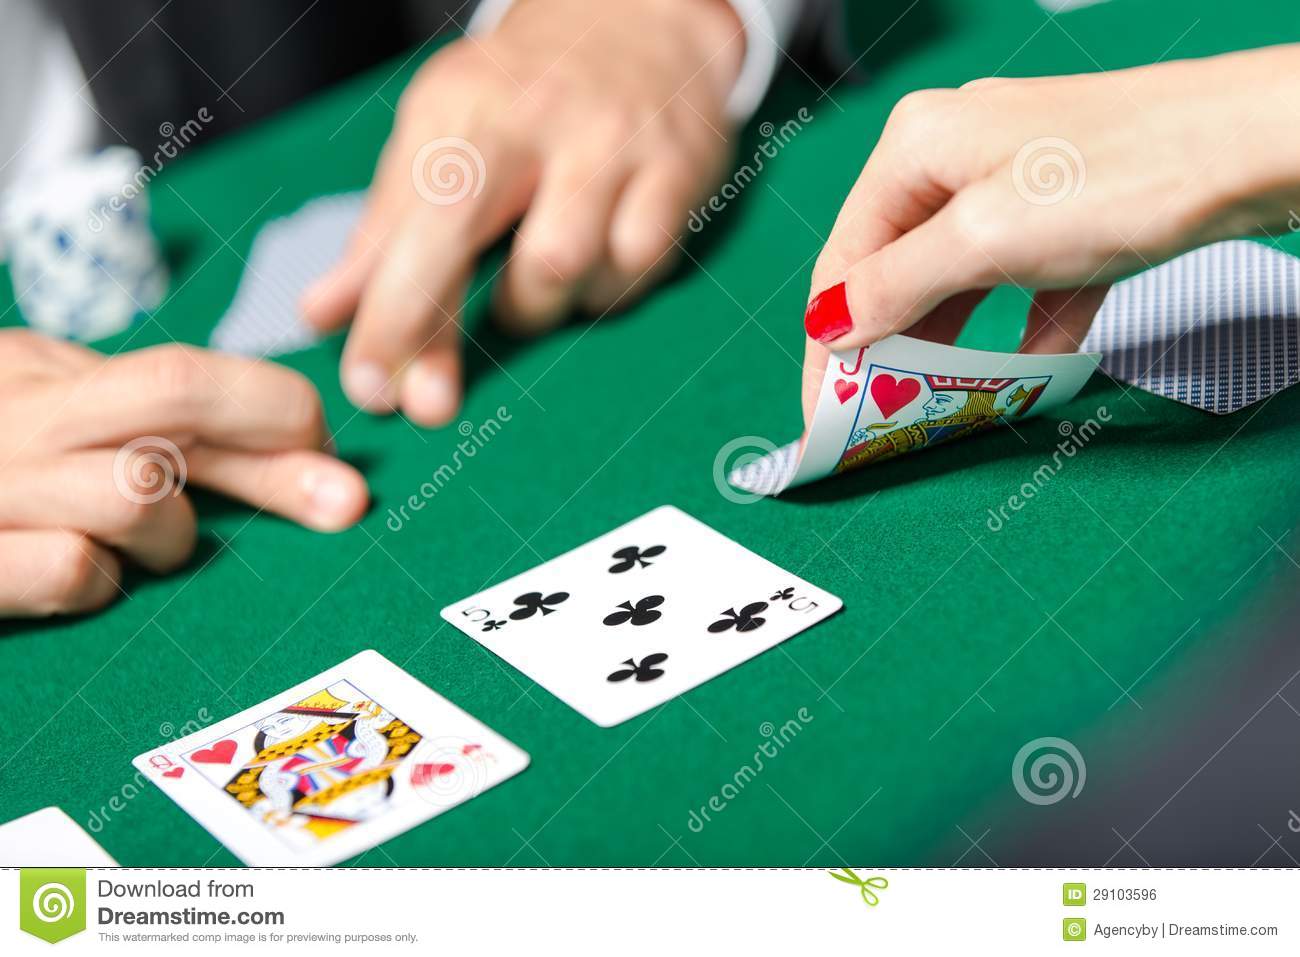 Match Between Poker Players Royalty Free Stock Image   Image  29103596